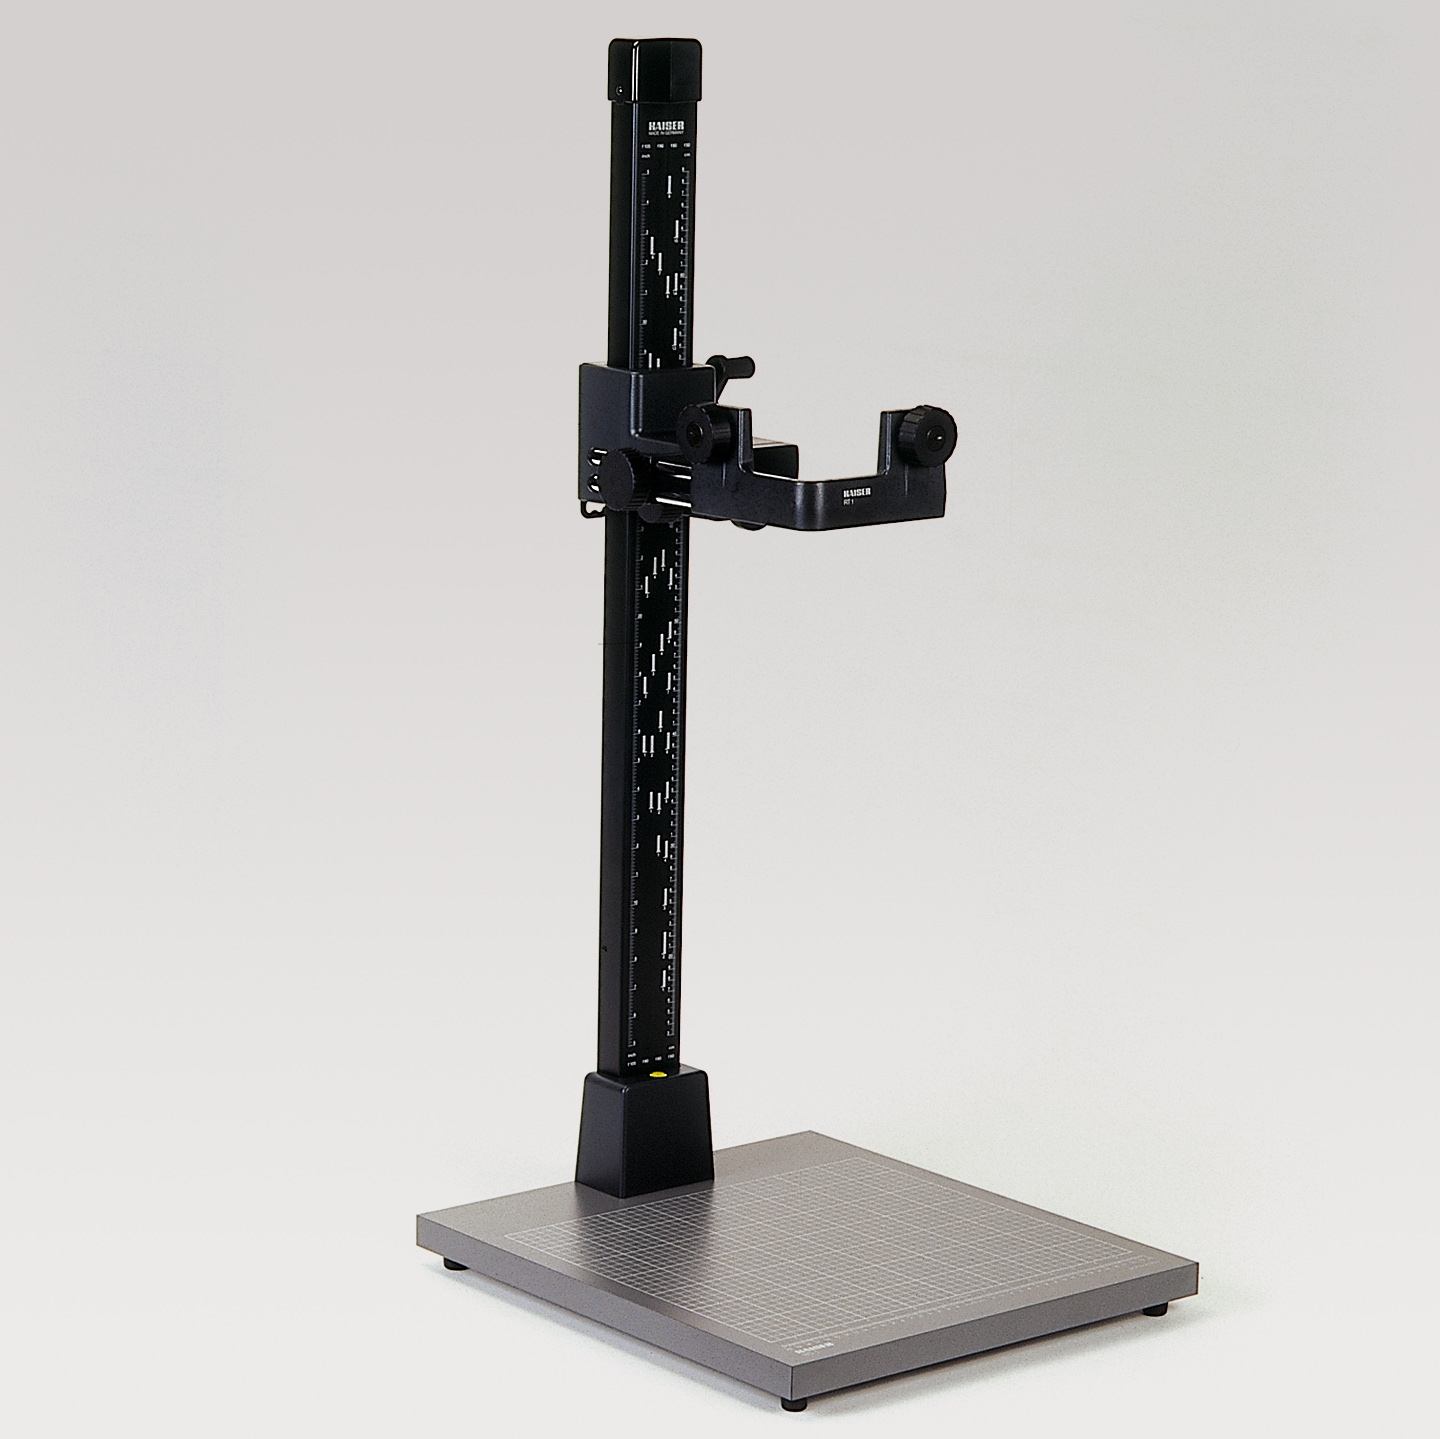 KAISER 5511 RS1 COPY STAND WITH RT 1 CAMERA ARM